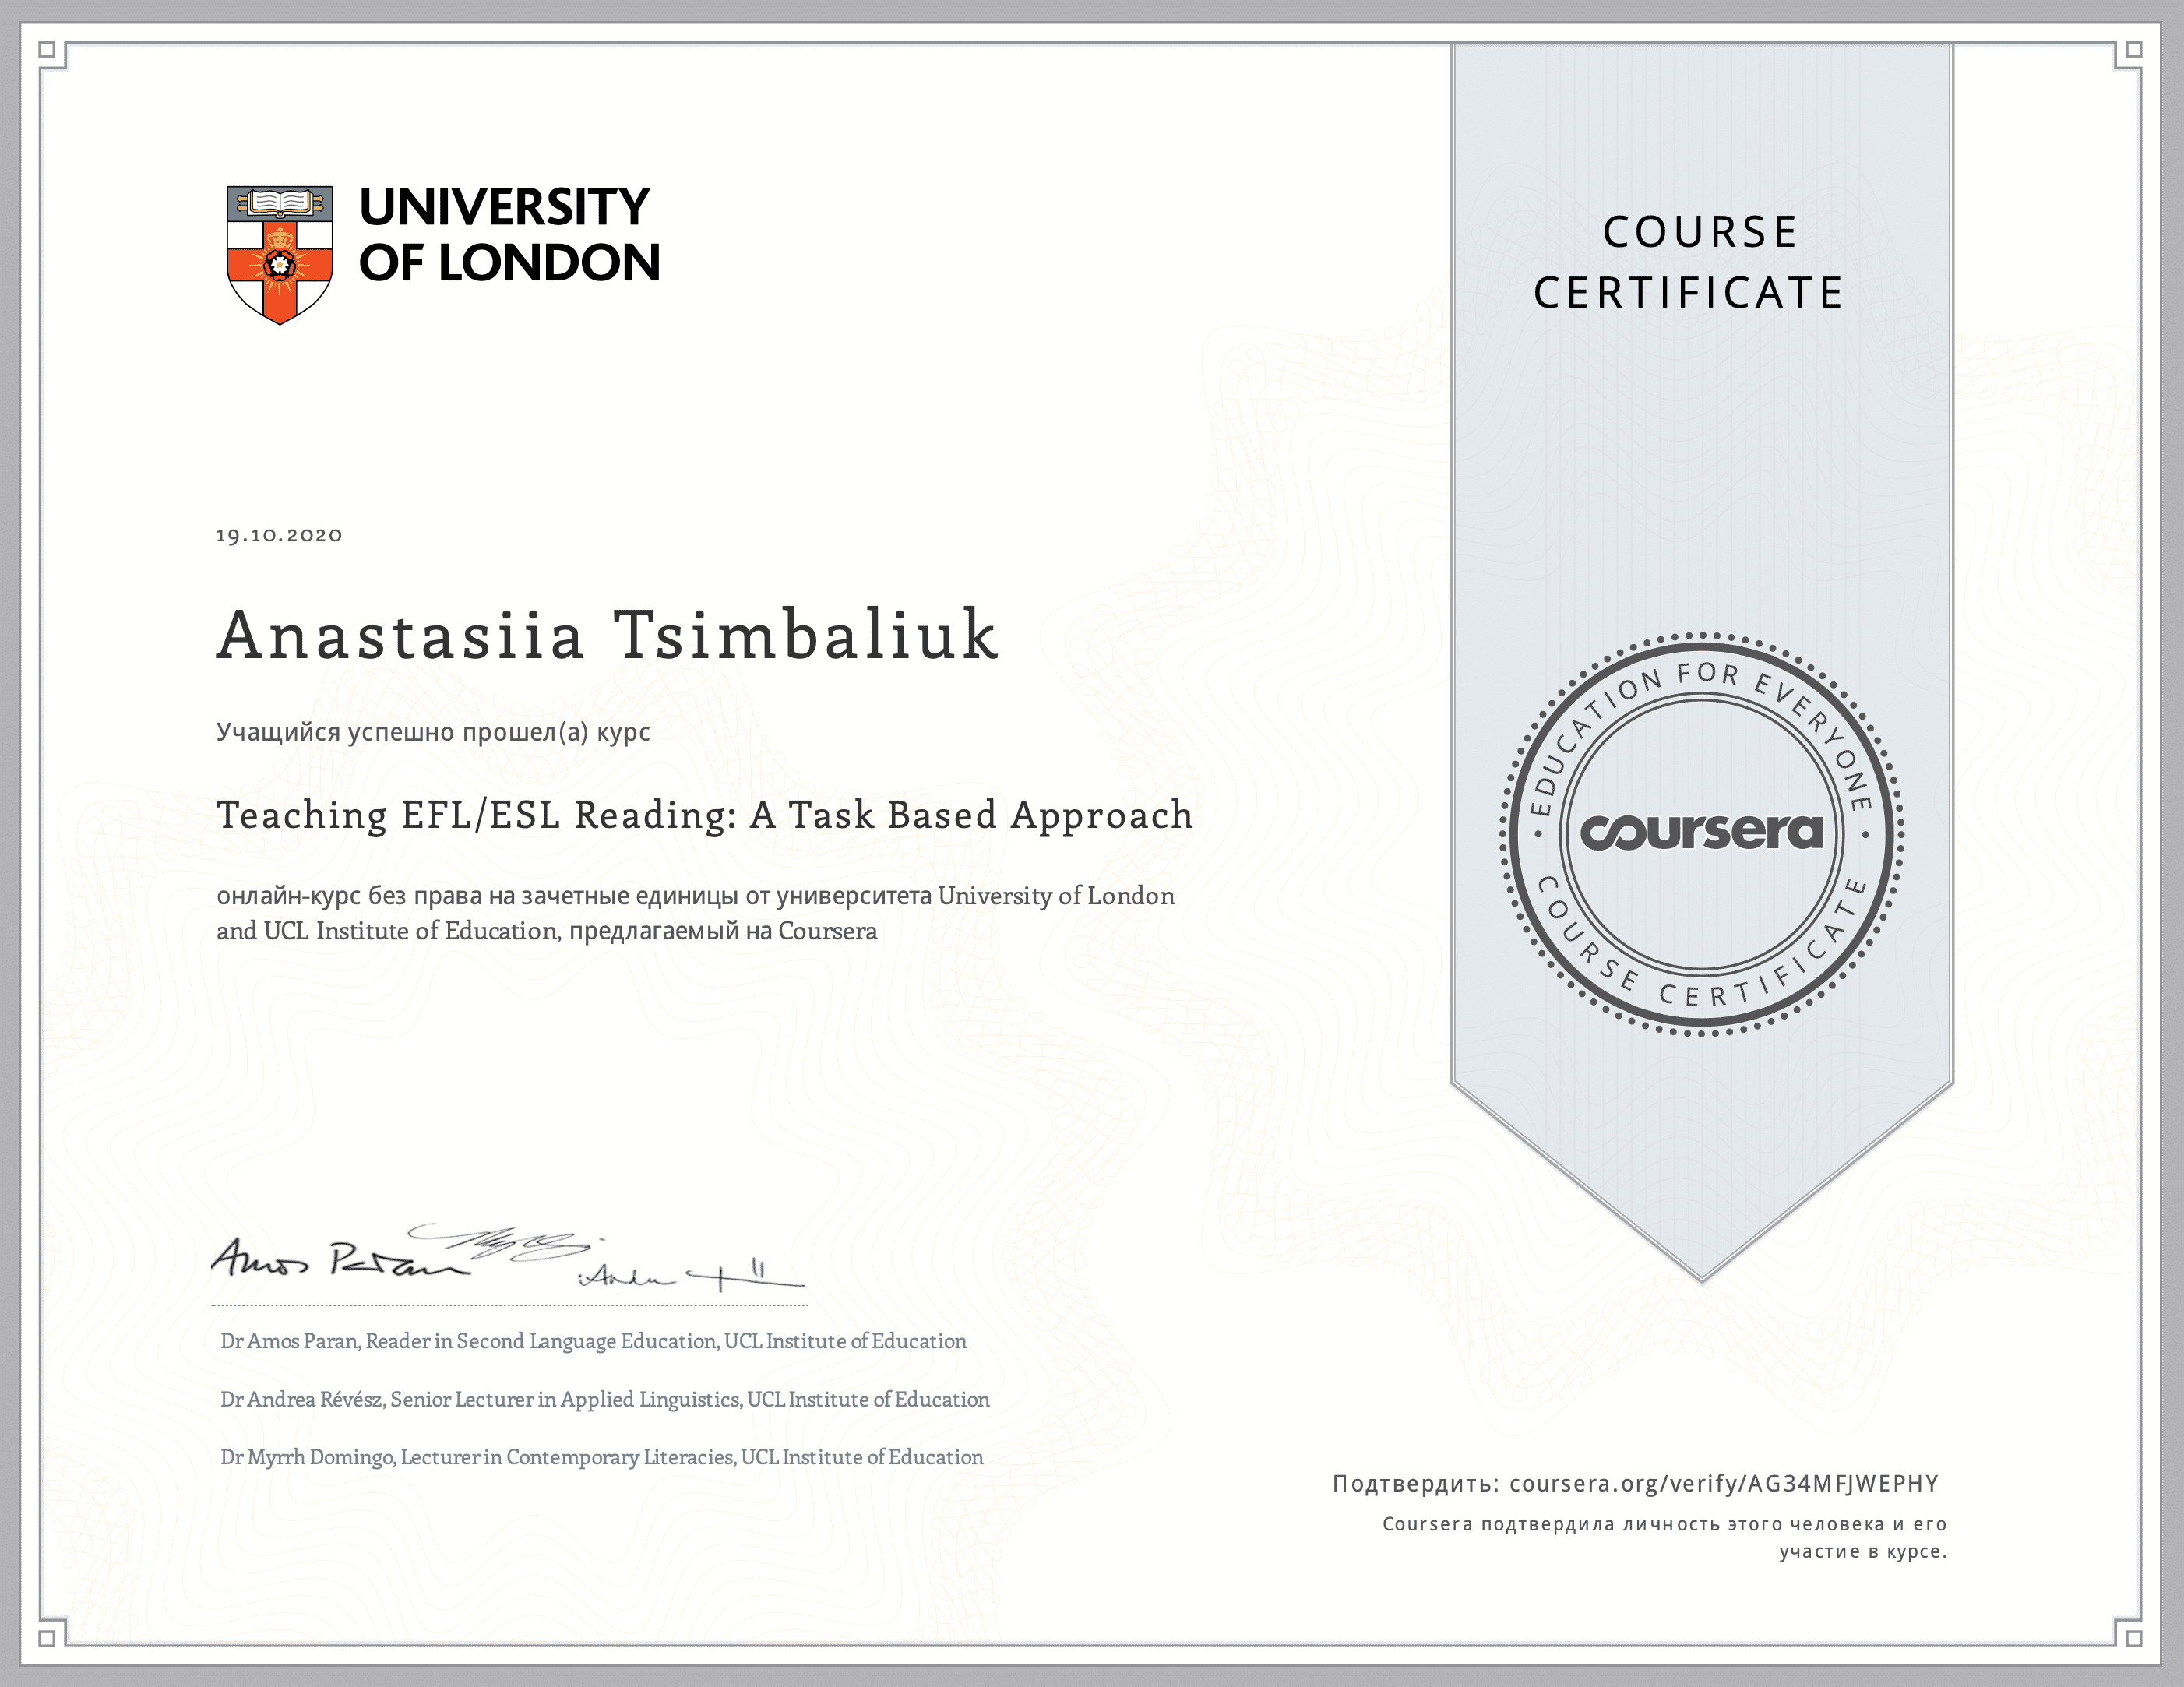 Coursera task based approach certificate